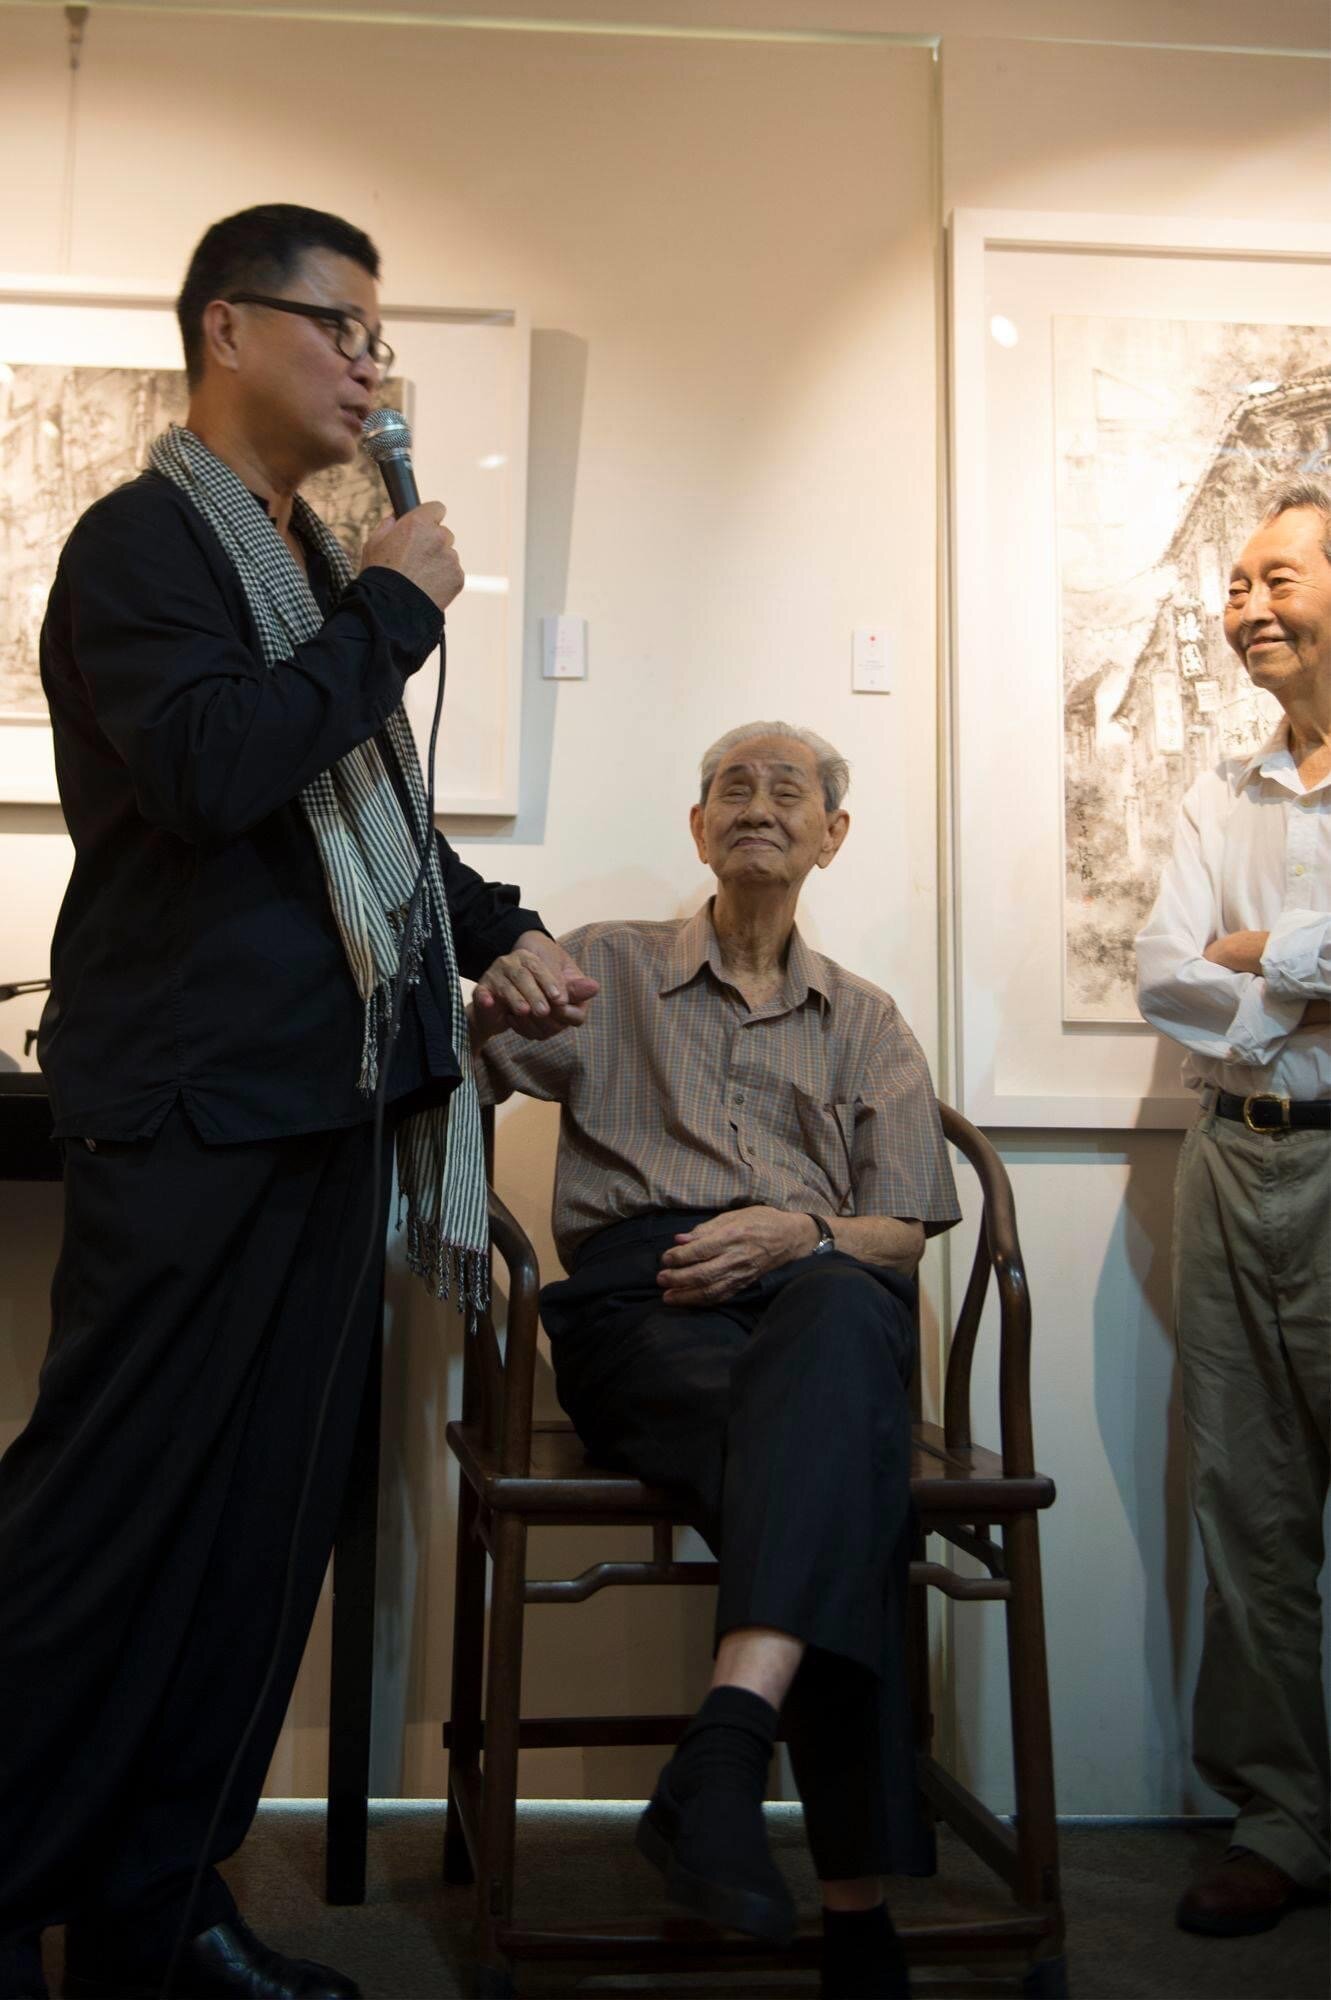  Mr Tung Yue Nang (Left) with Mr Lim Tze Peng (Centre) and Mr Choy Wen Yang (right) 